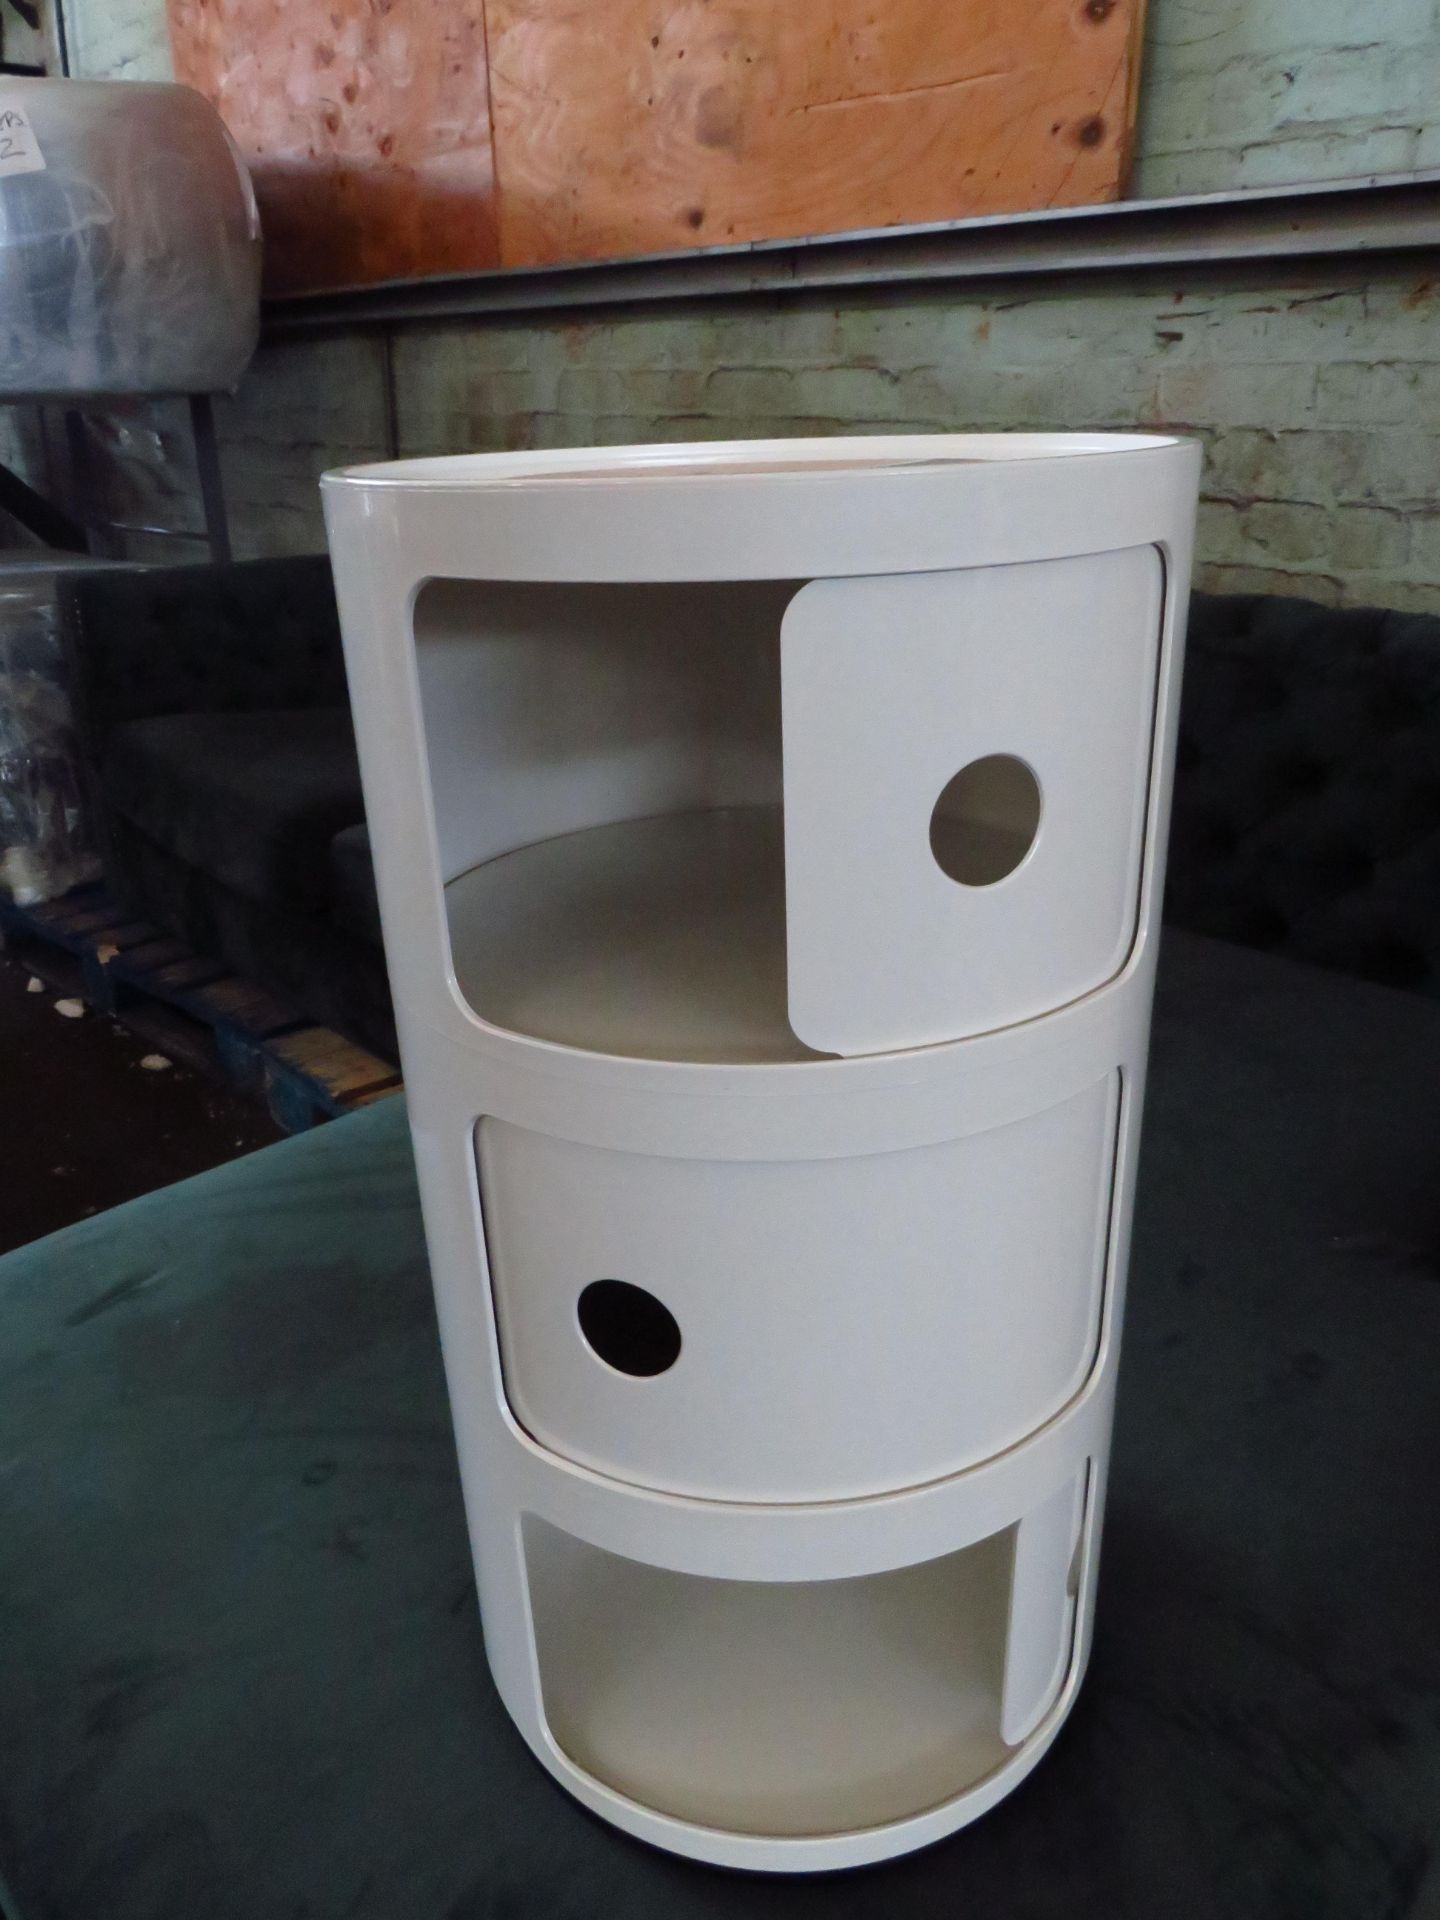 Heals Componibili Cabinet 3 Element White RRP Â£131.00 - The items in this lot are thought to be